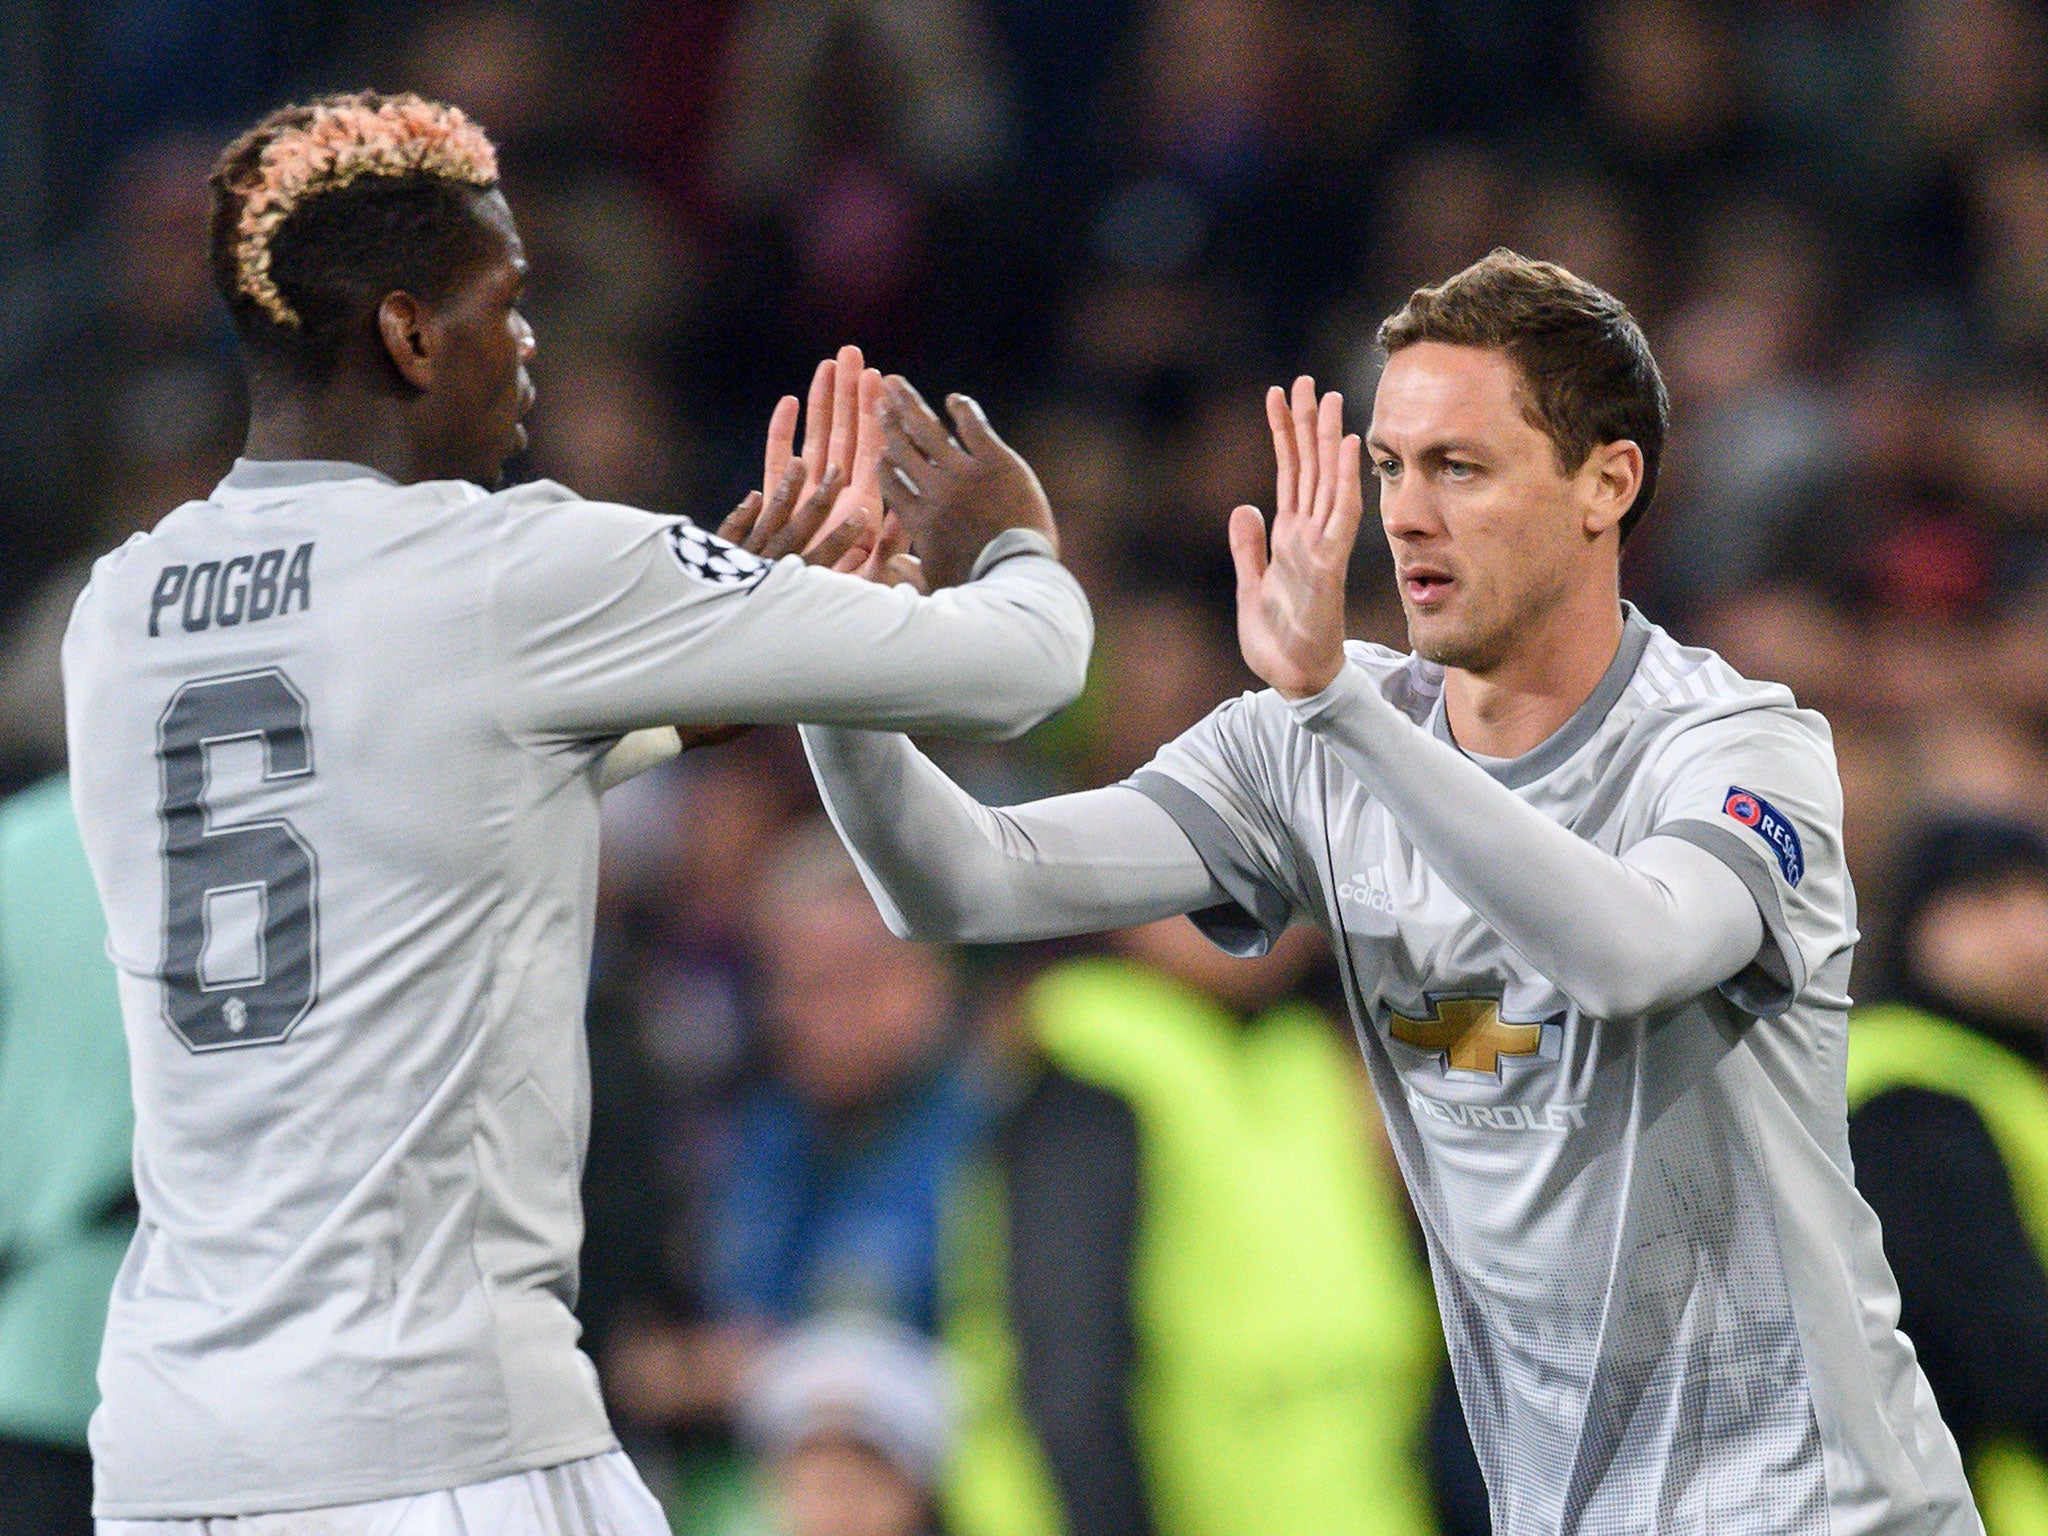 Paul Pogba and Nemanja Matic could line up alongside one another in midfield